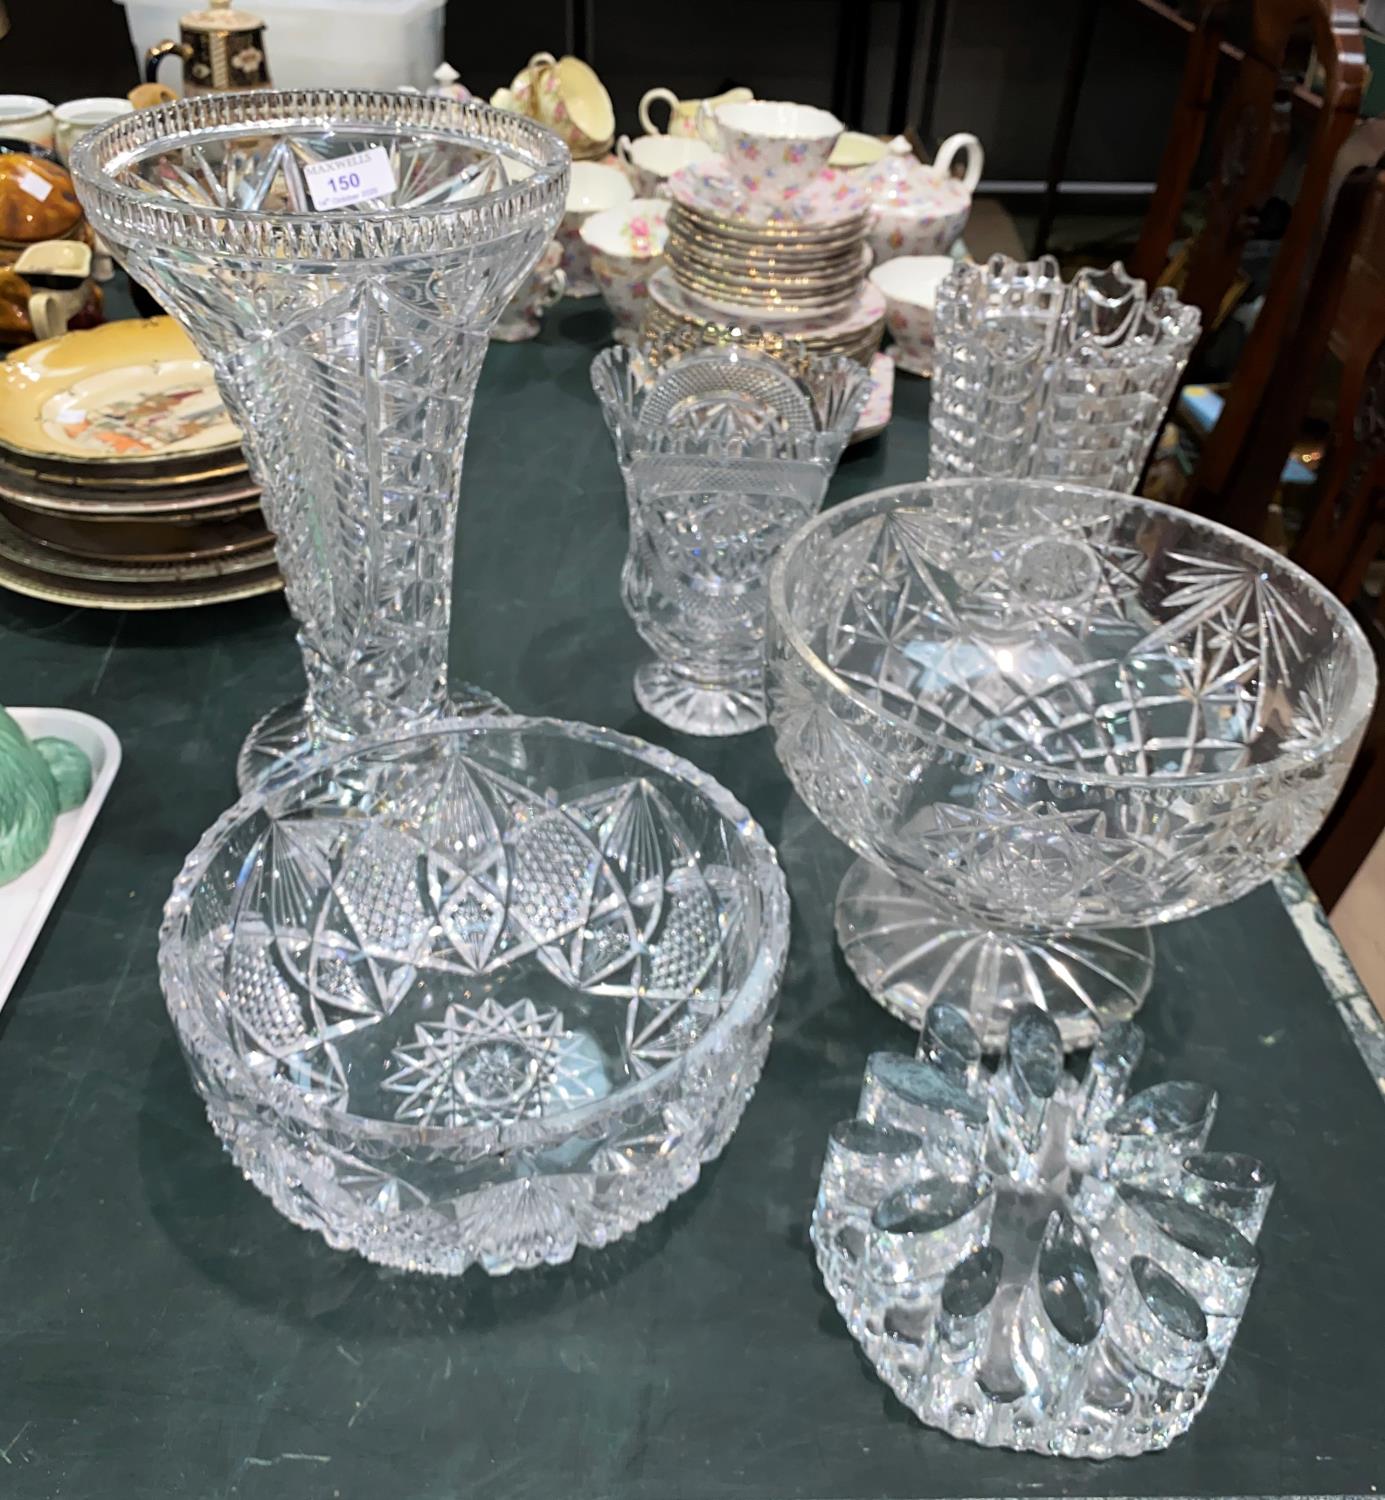 A selection of glass bowls, vases etc.